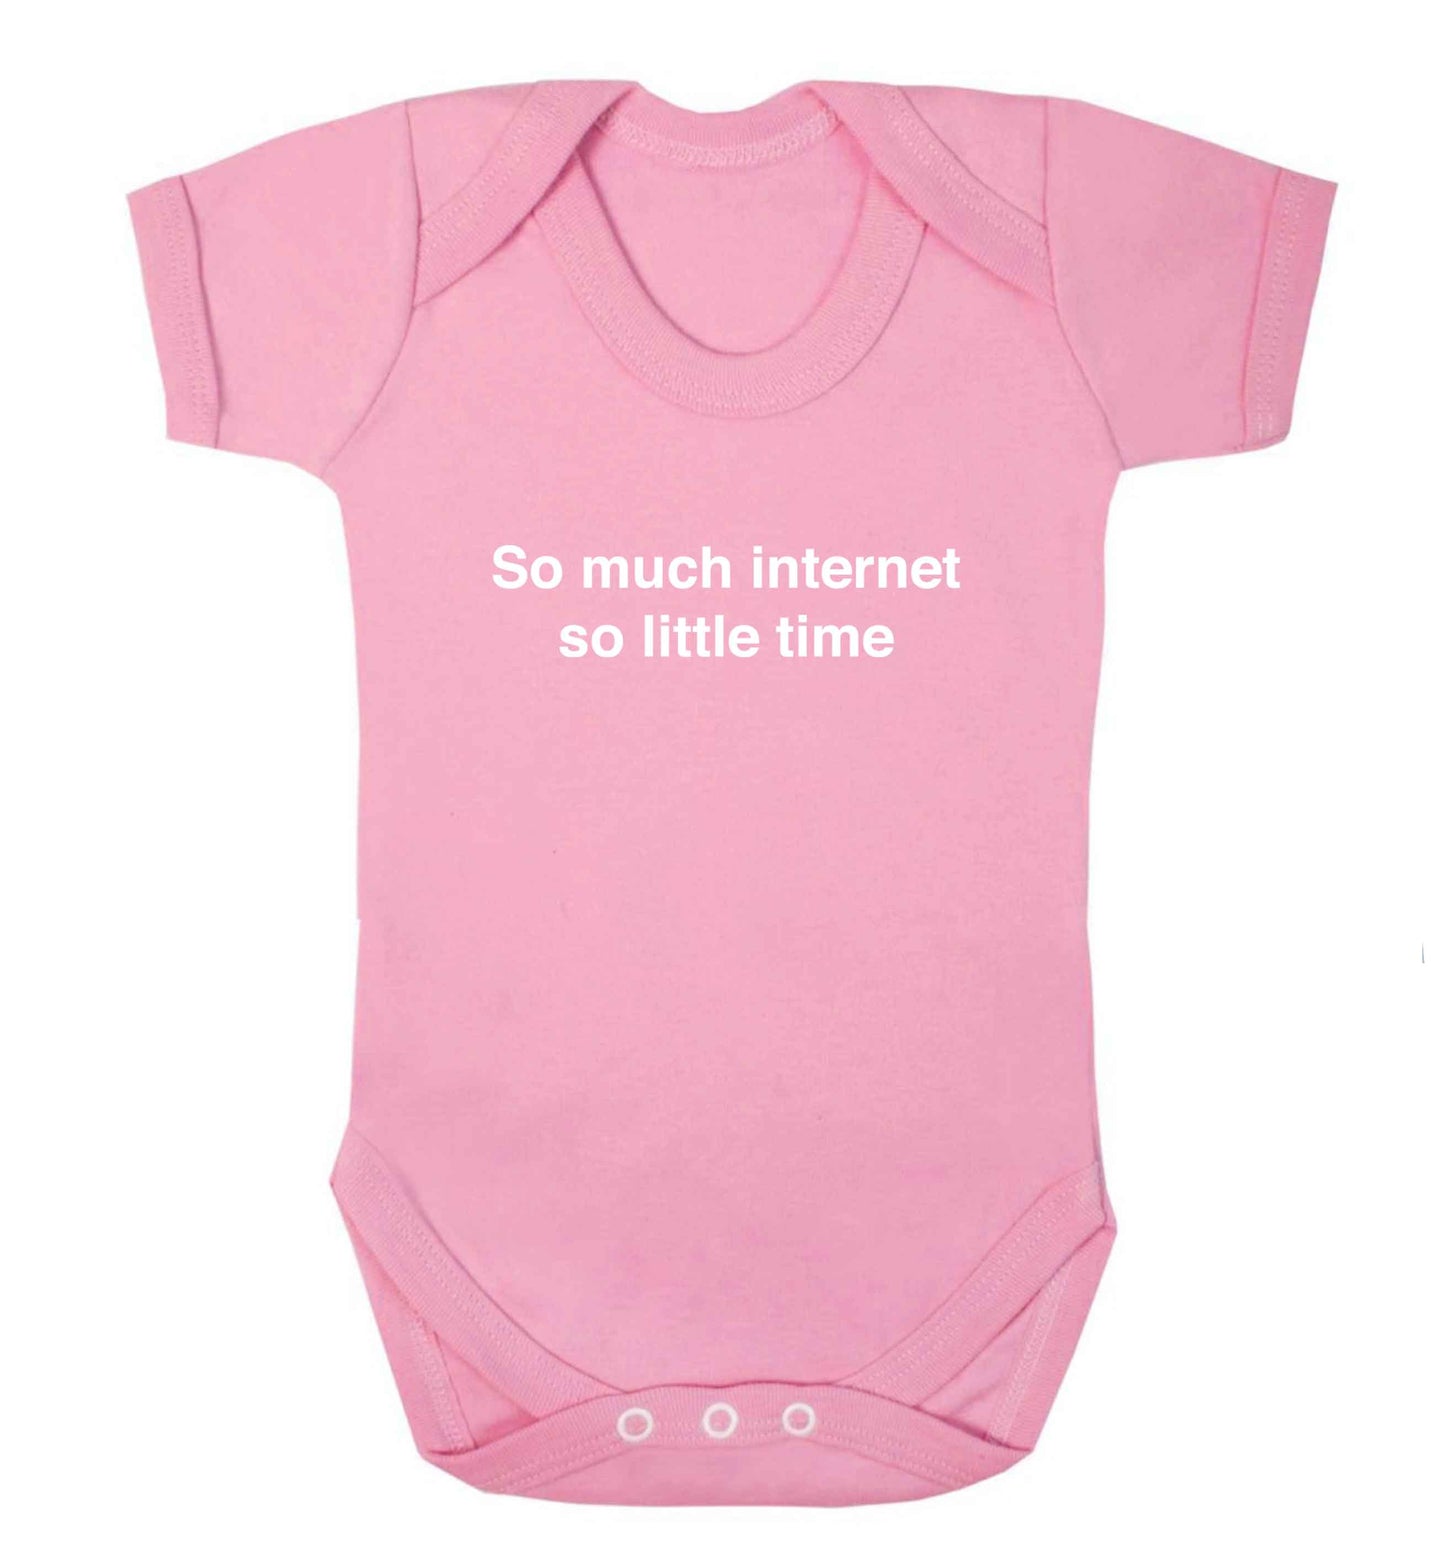 So much internet so little time baby vest pale pink 18-24 months